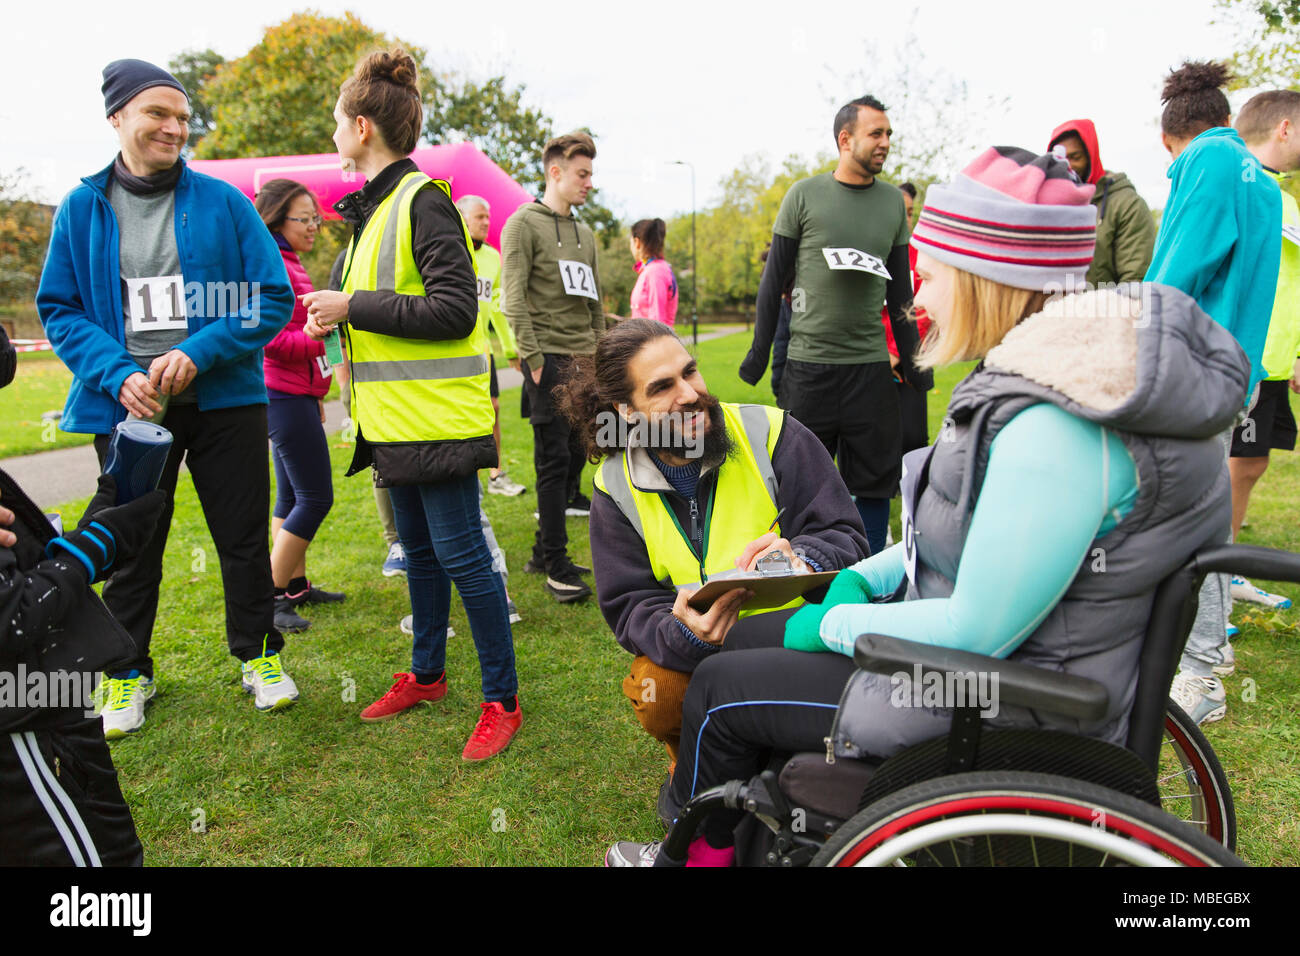 Woman in wheelchair checking in with volunteer at charity race in park Stock Photo